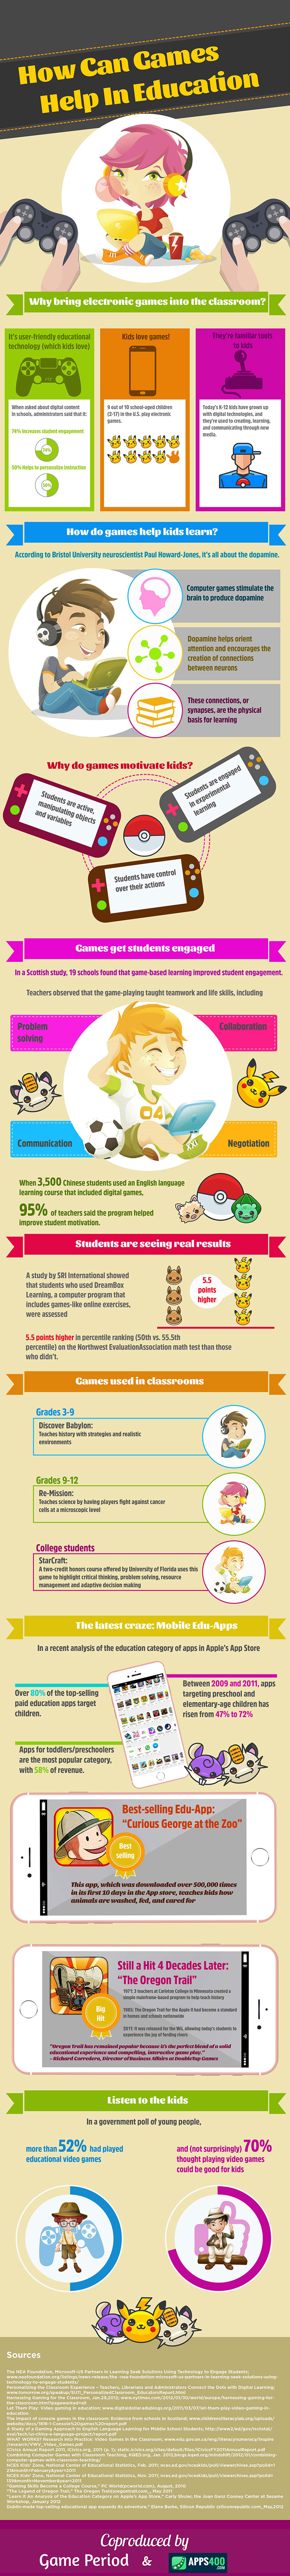 How can Games help in Education